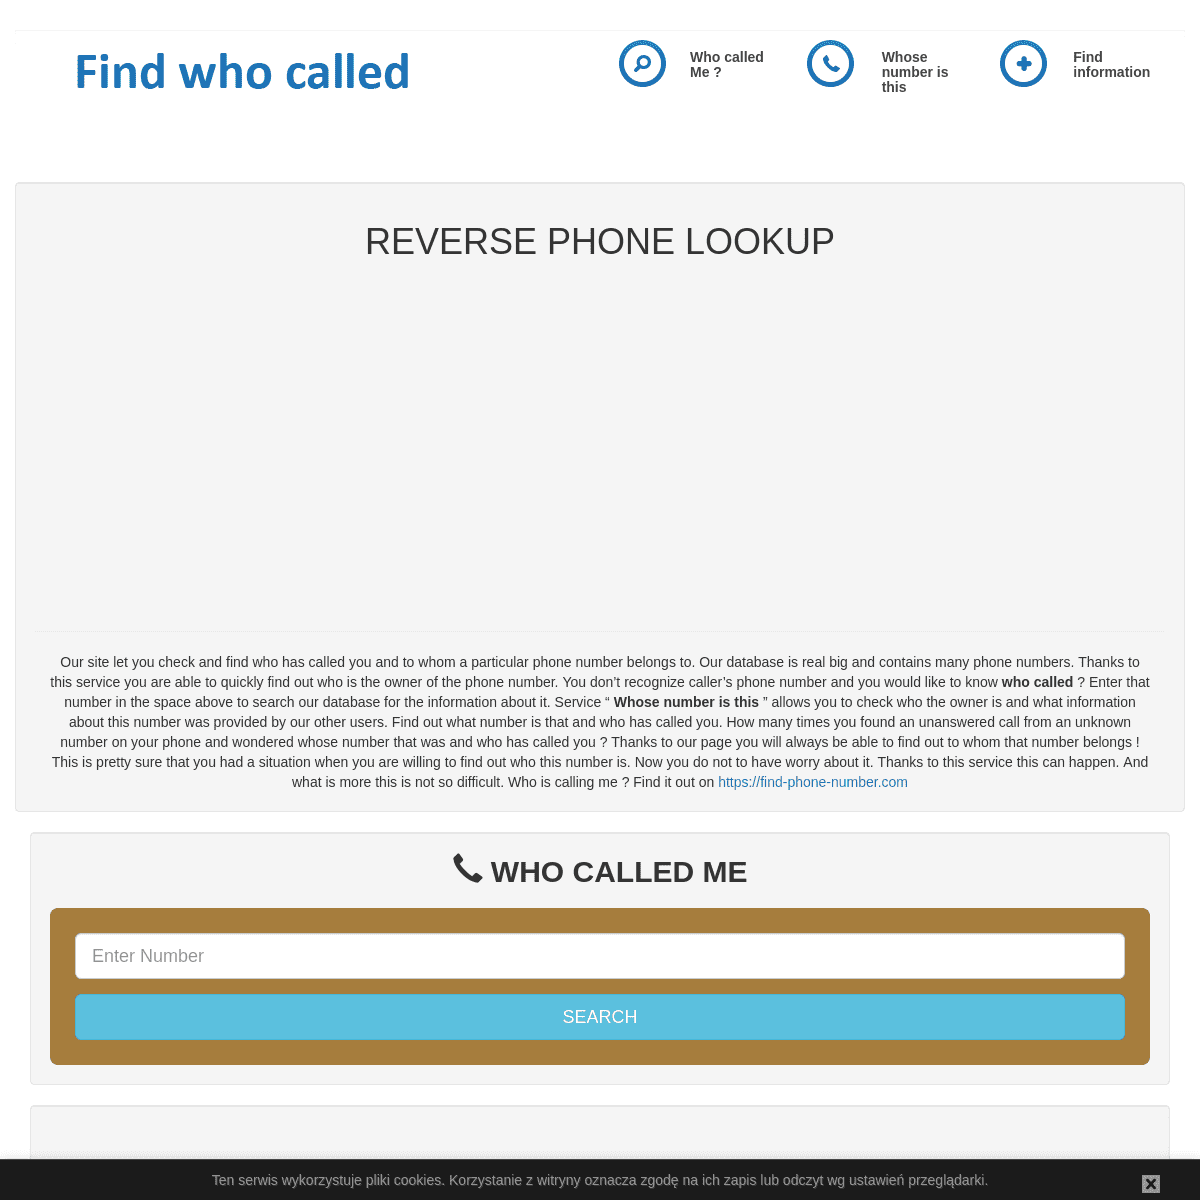 A complete backup of whose-number-is.com